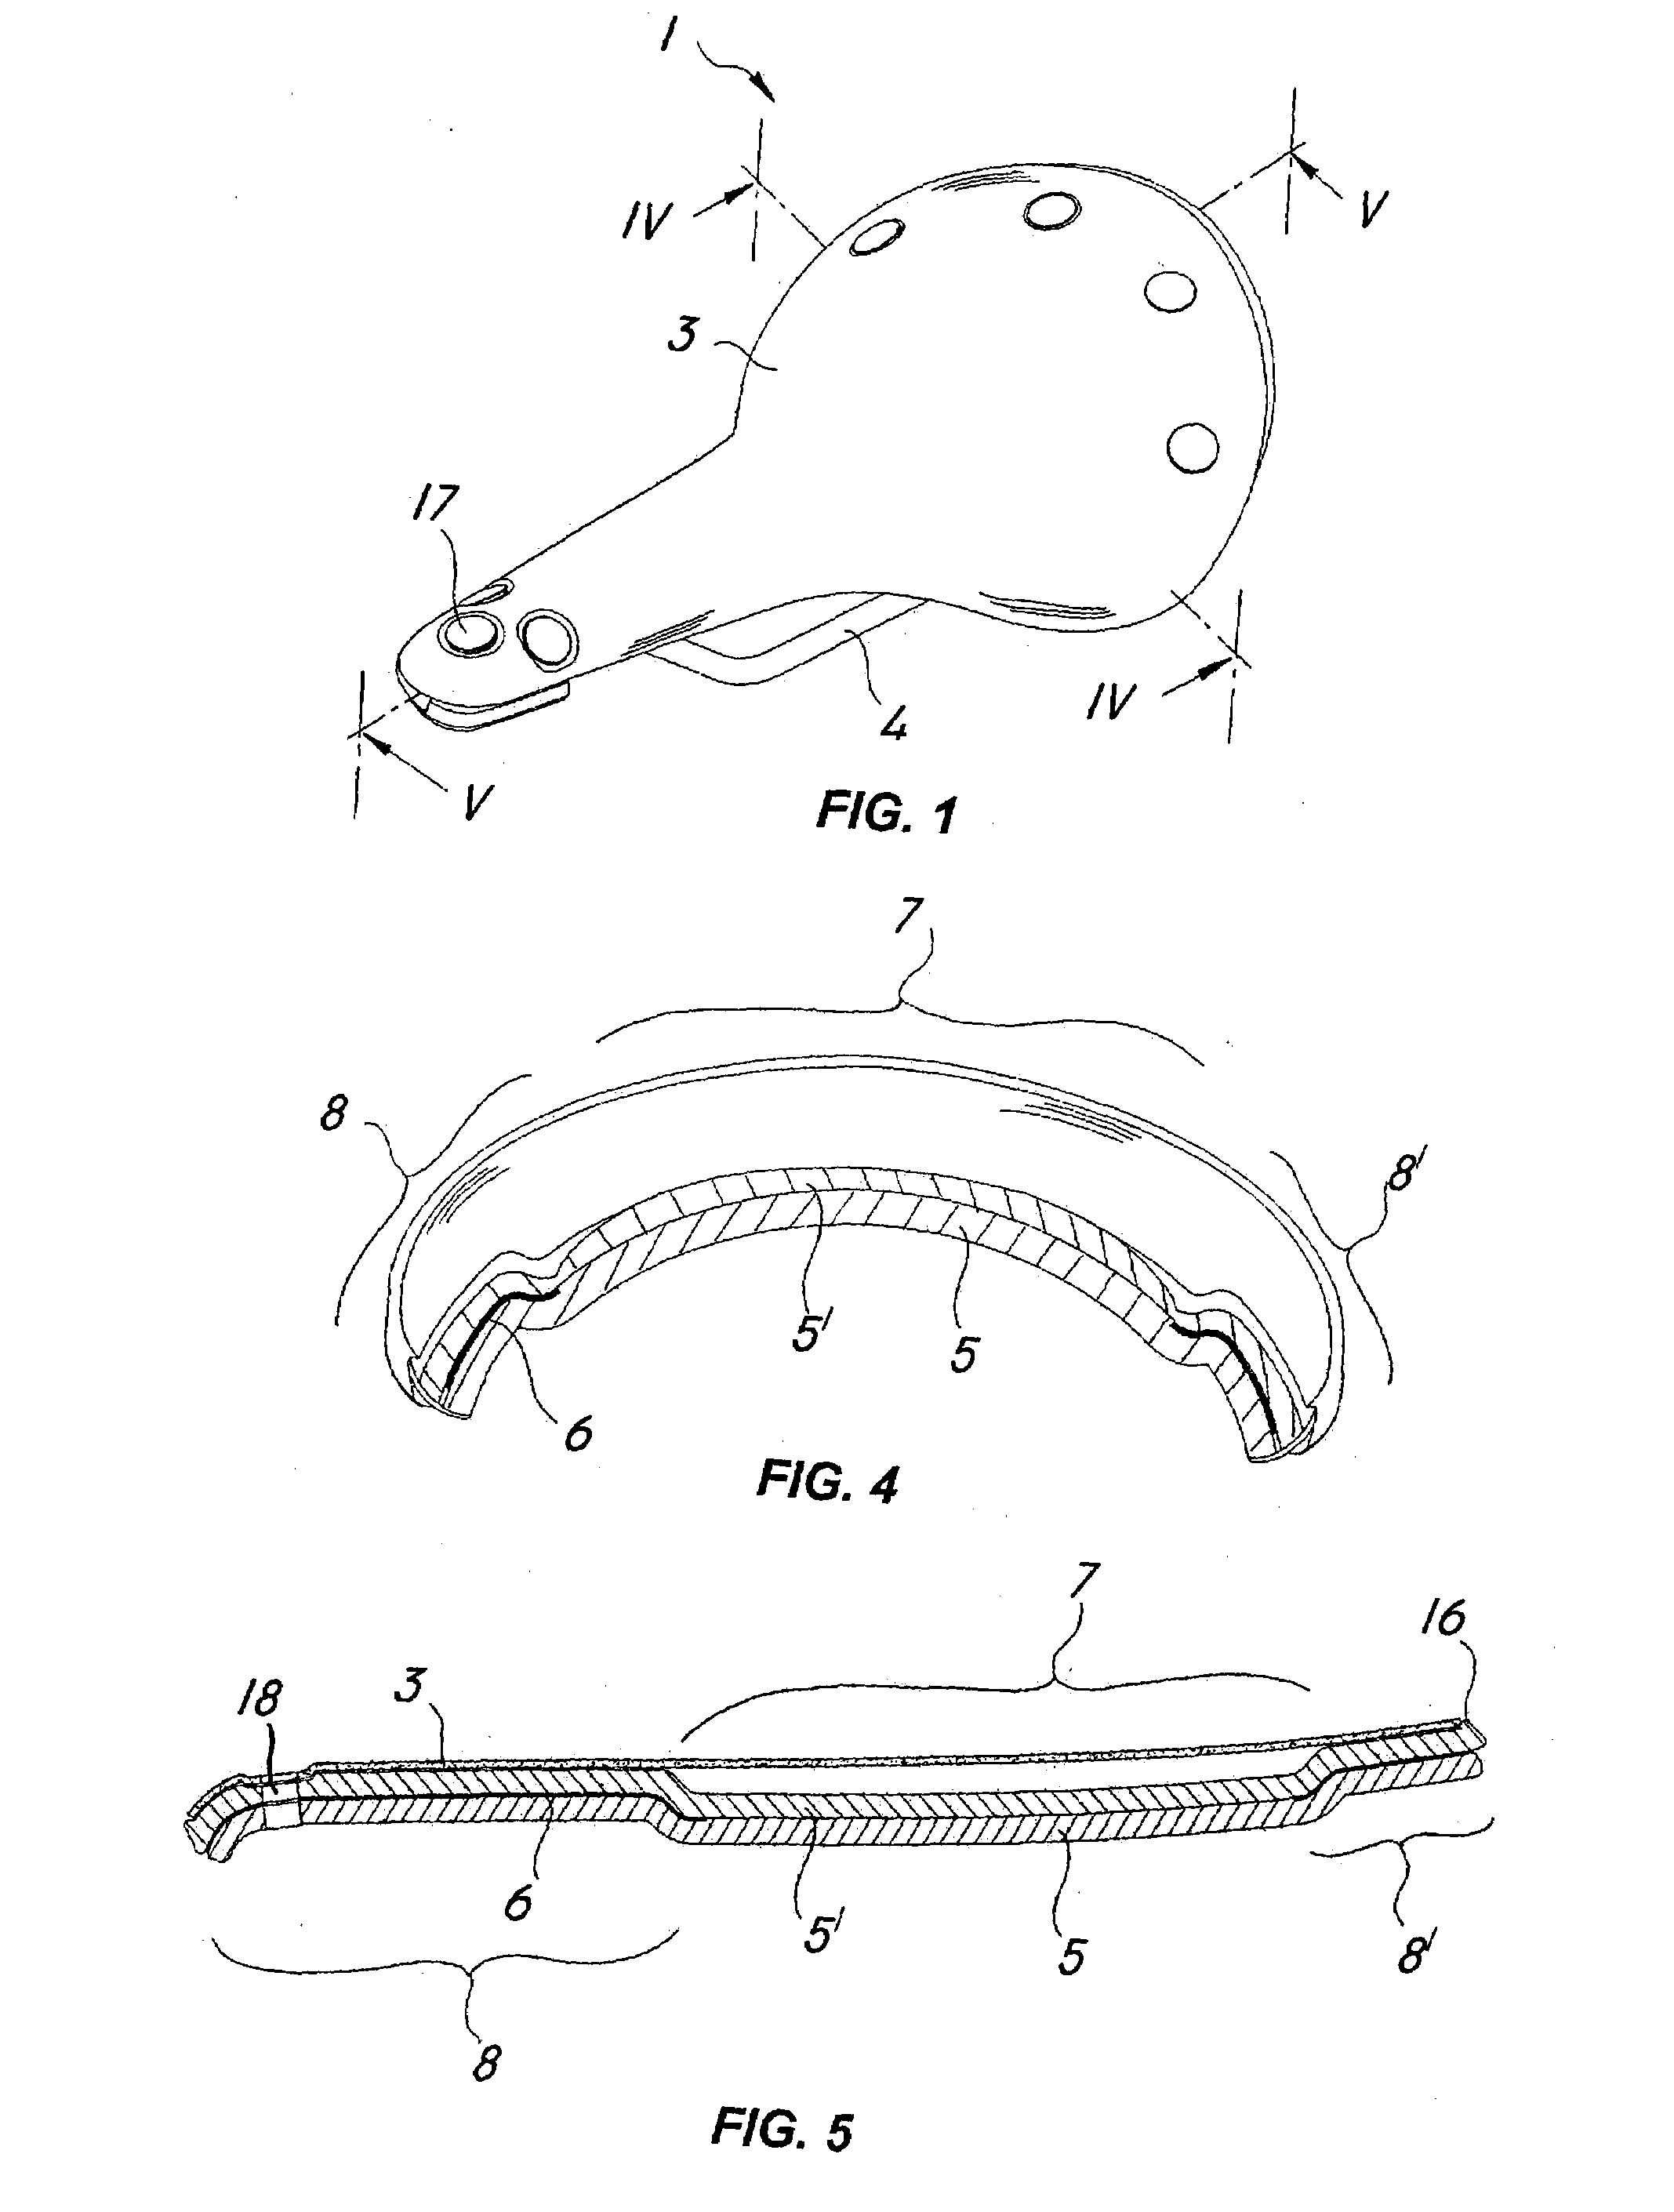 Seating structure made of natural composite material and process for making same